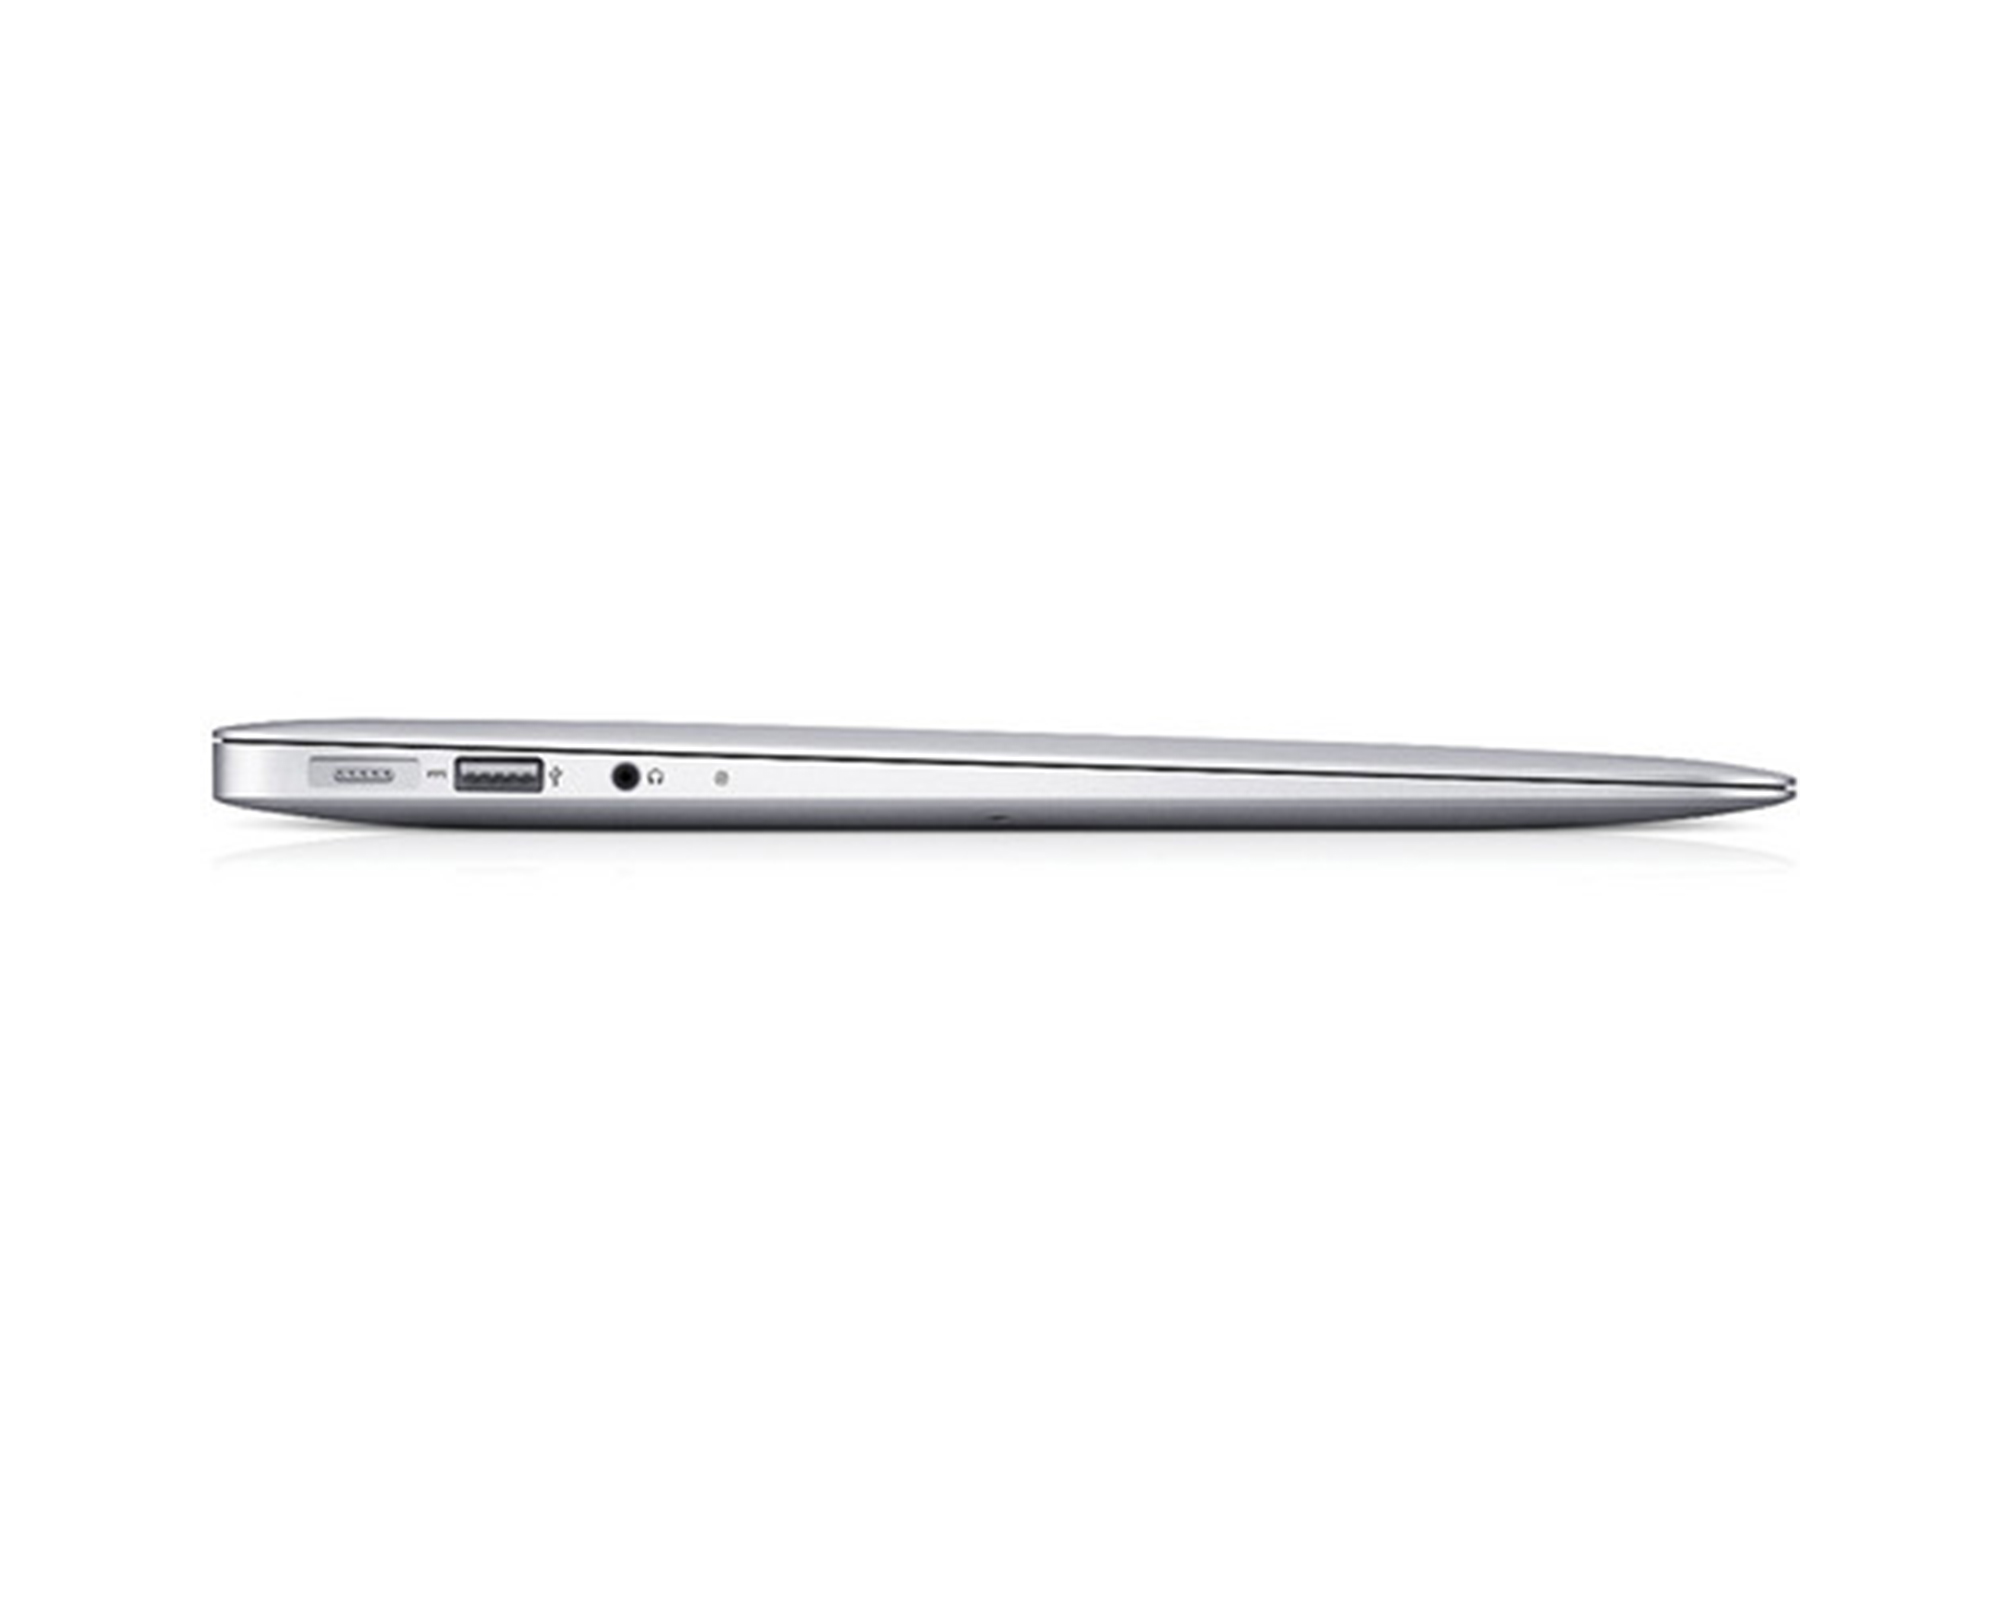 Restored 13" Apple MacBook Air 1.8GHz Dual Core i5 4GB Memory / 256GB SSD (Turbo Boost to 2.8GHz) (Refurbished) - image 4 of 5